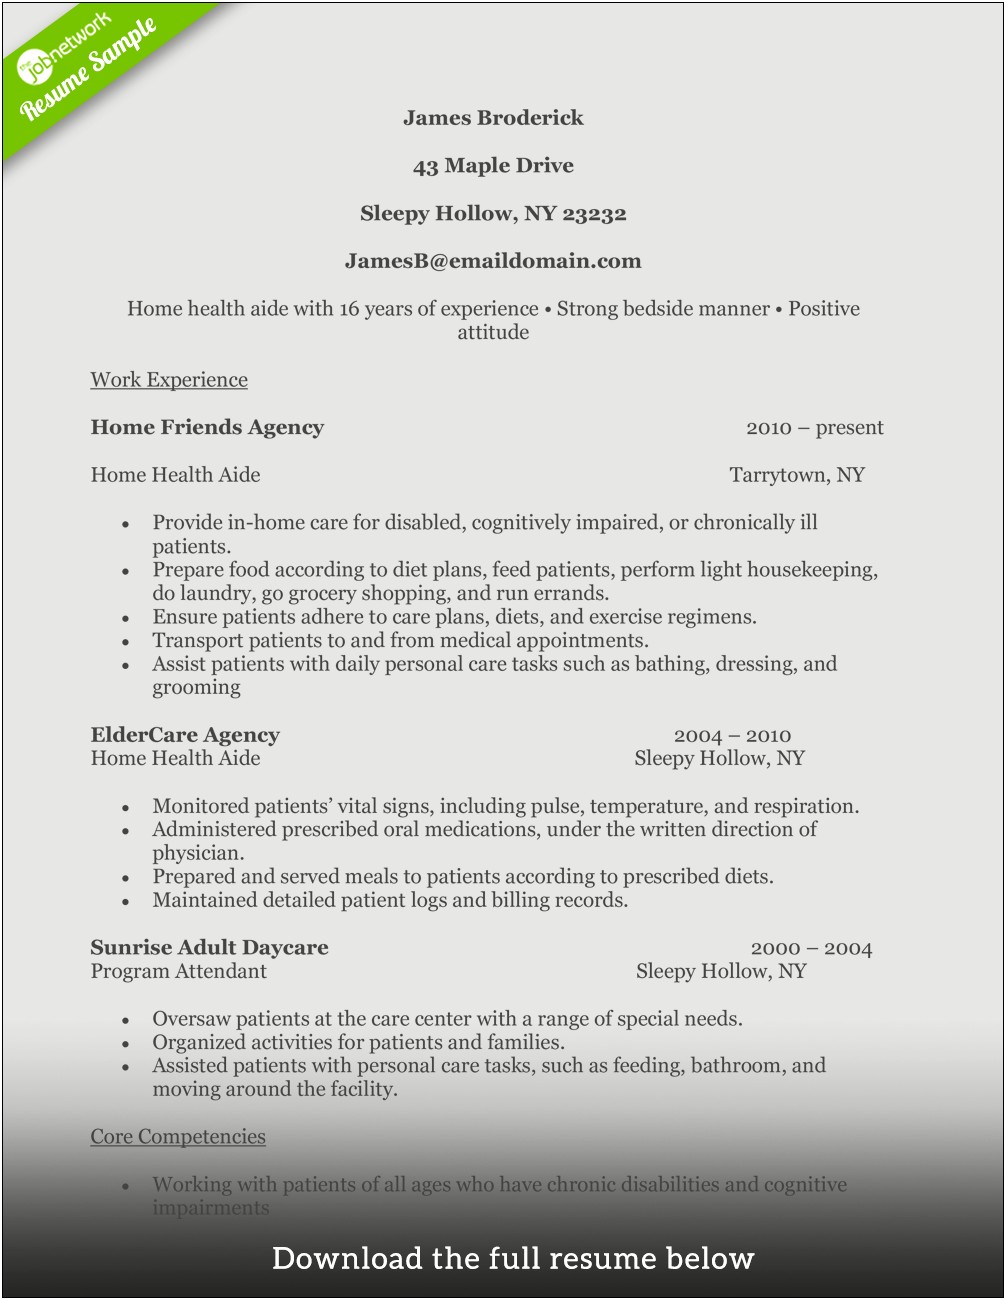 Medical Assistant Resume Sample Patient Pool